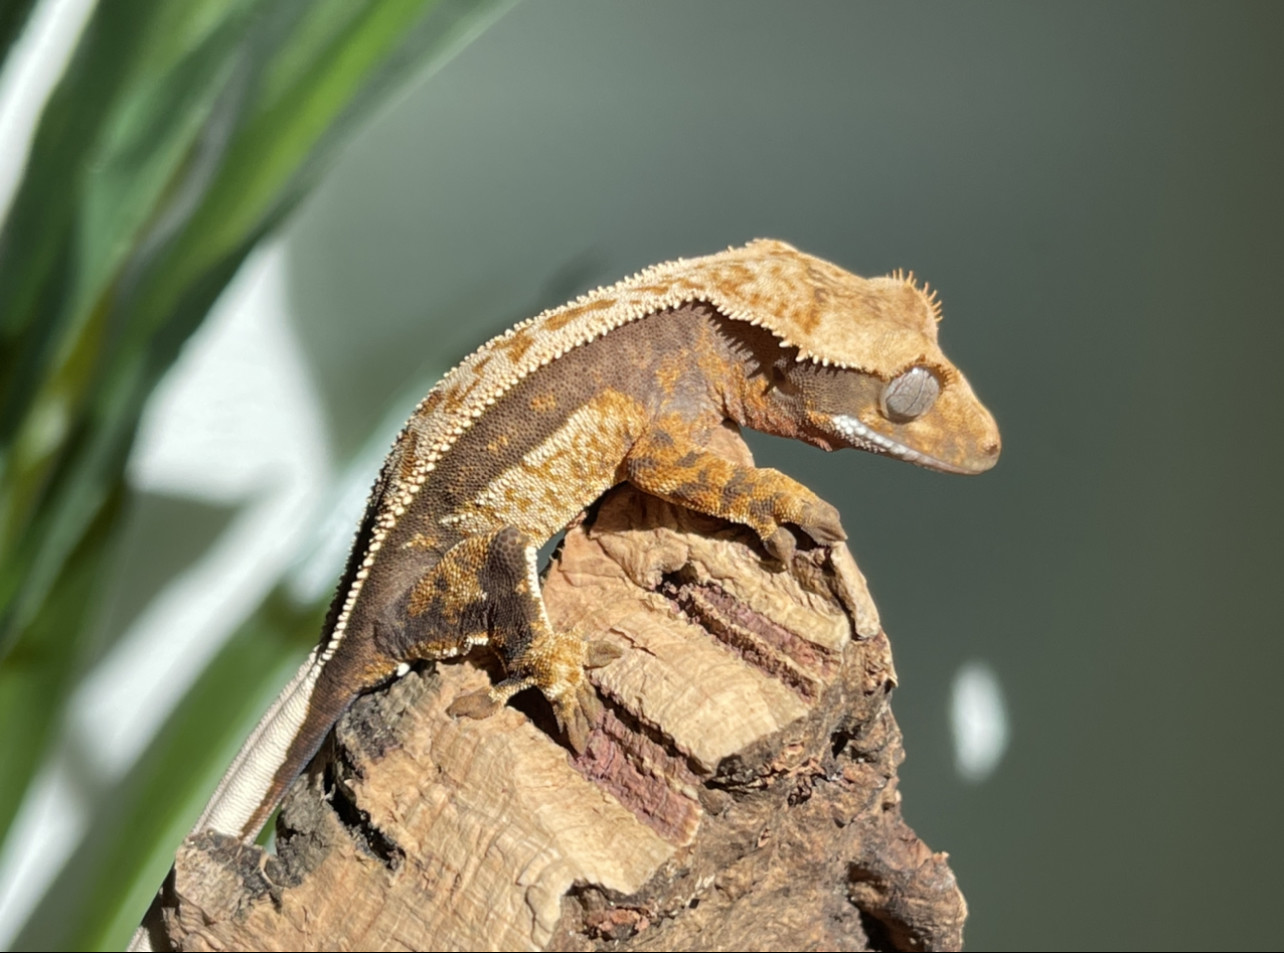 Quad Stripe Male Crested Gecko by Fusion Cresties